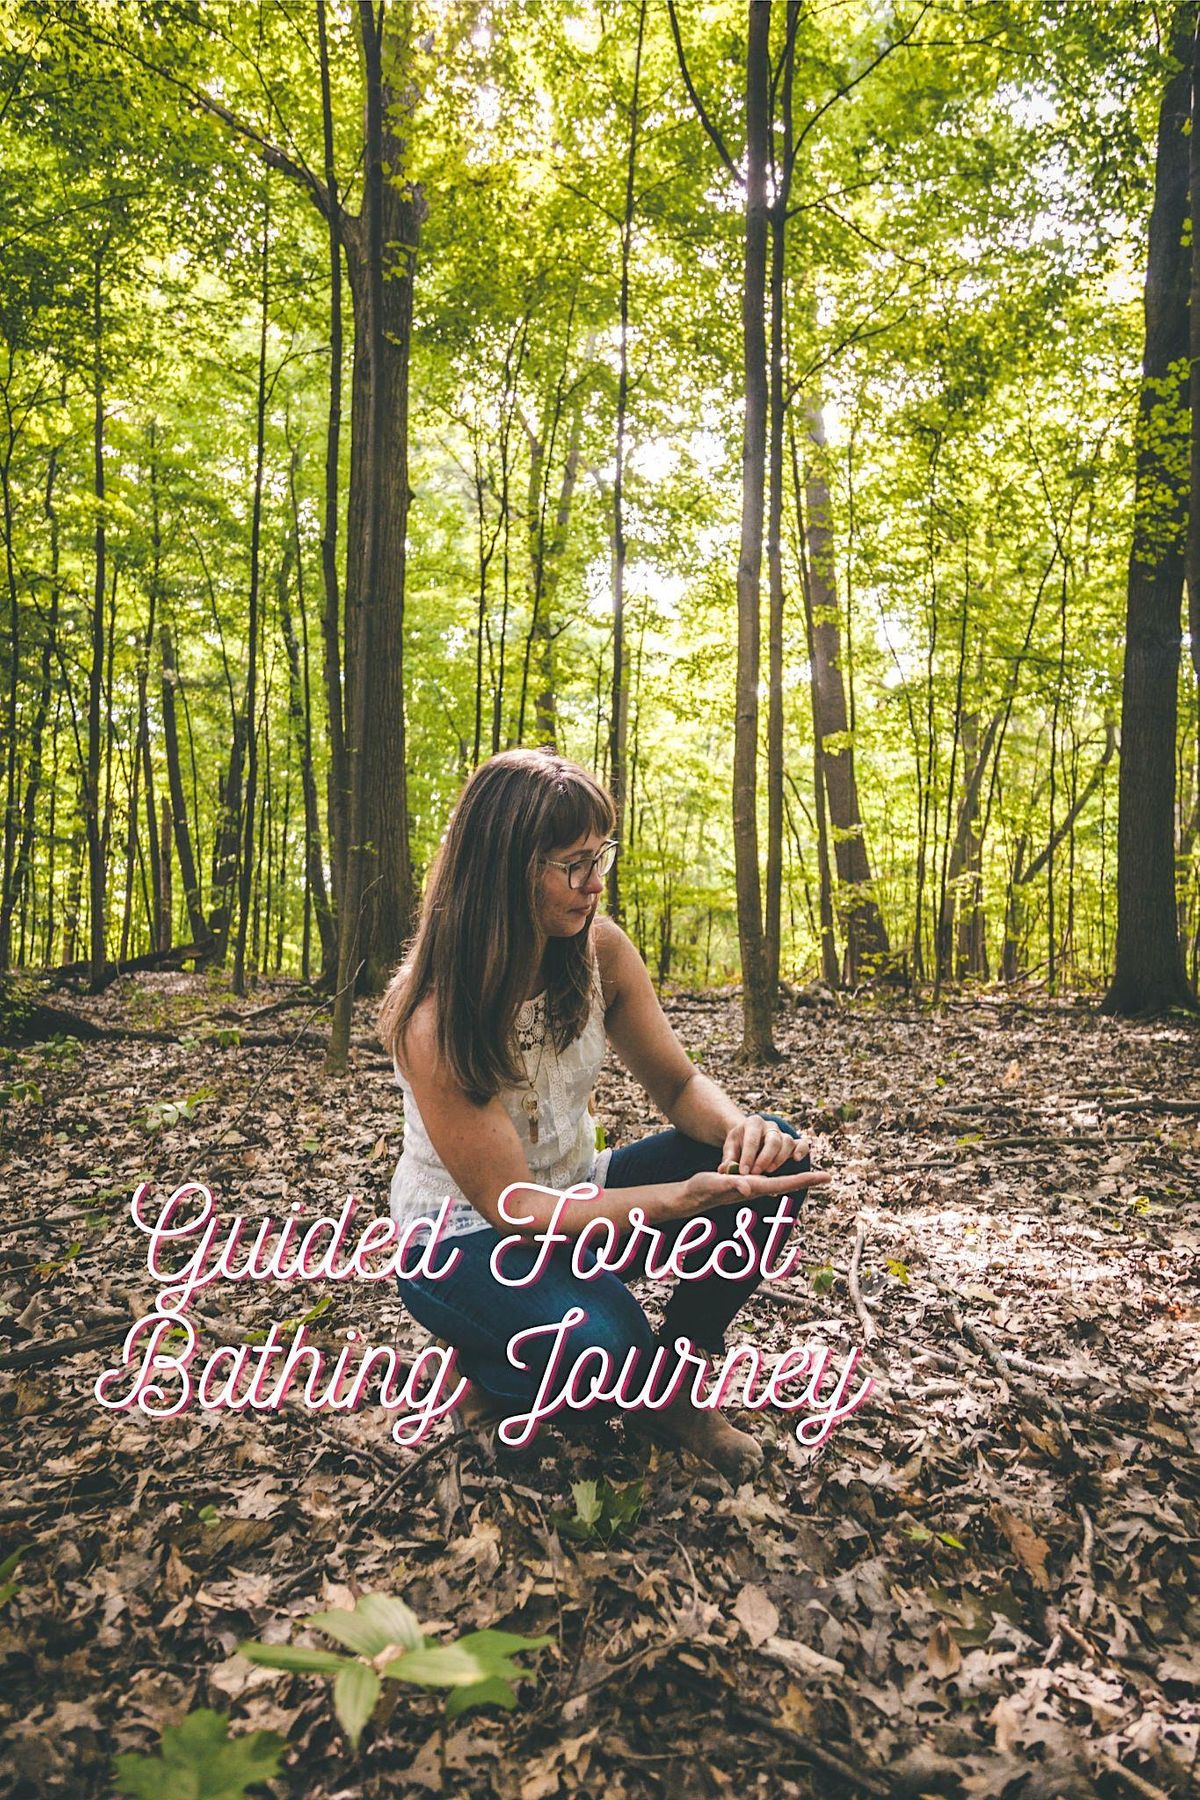 Guided Forest Bathing Journey